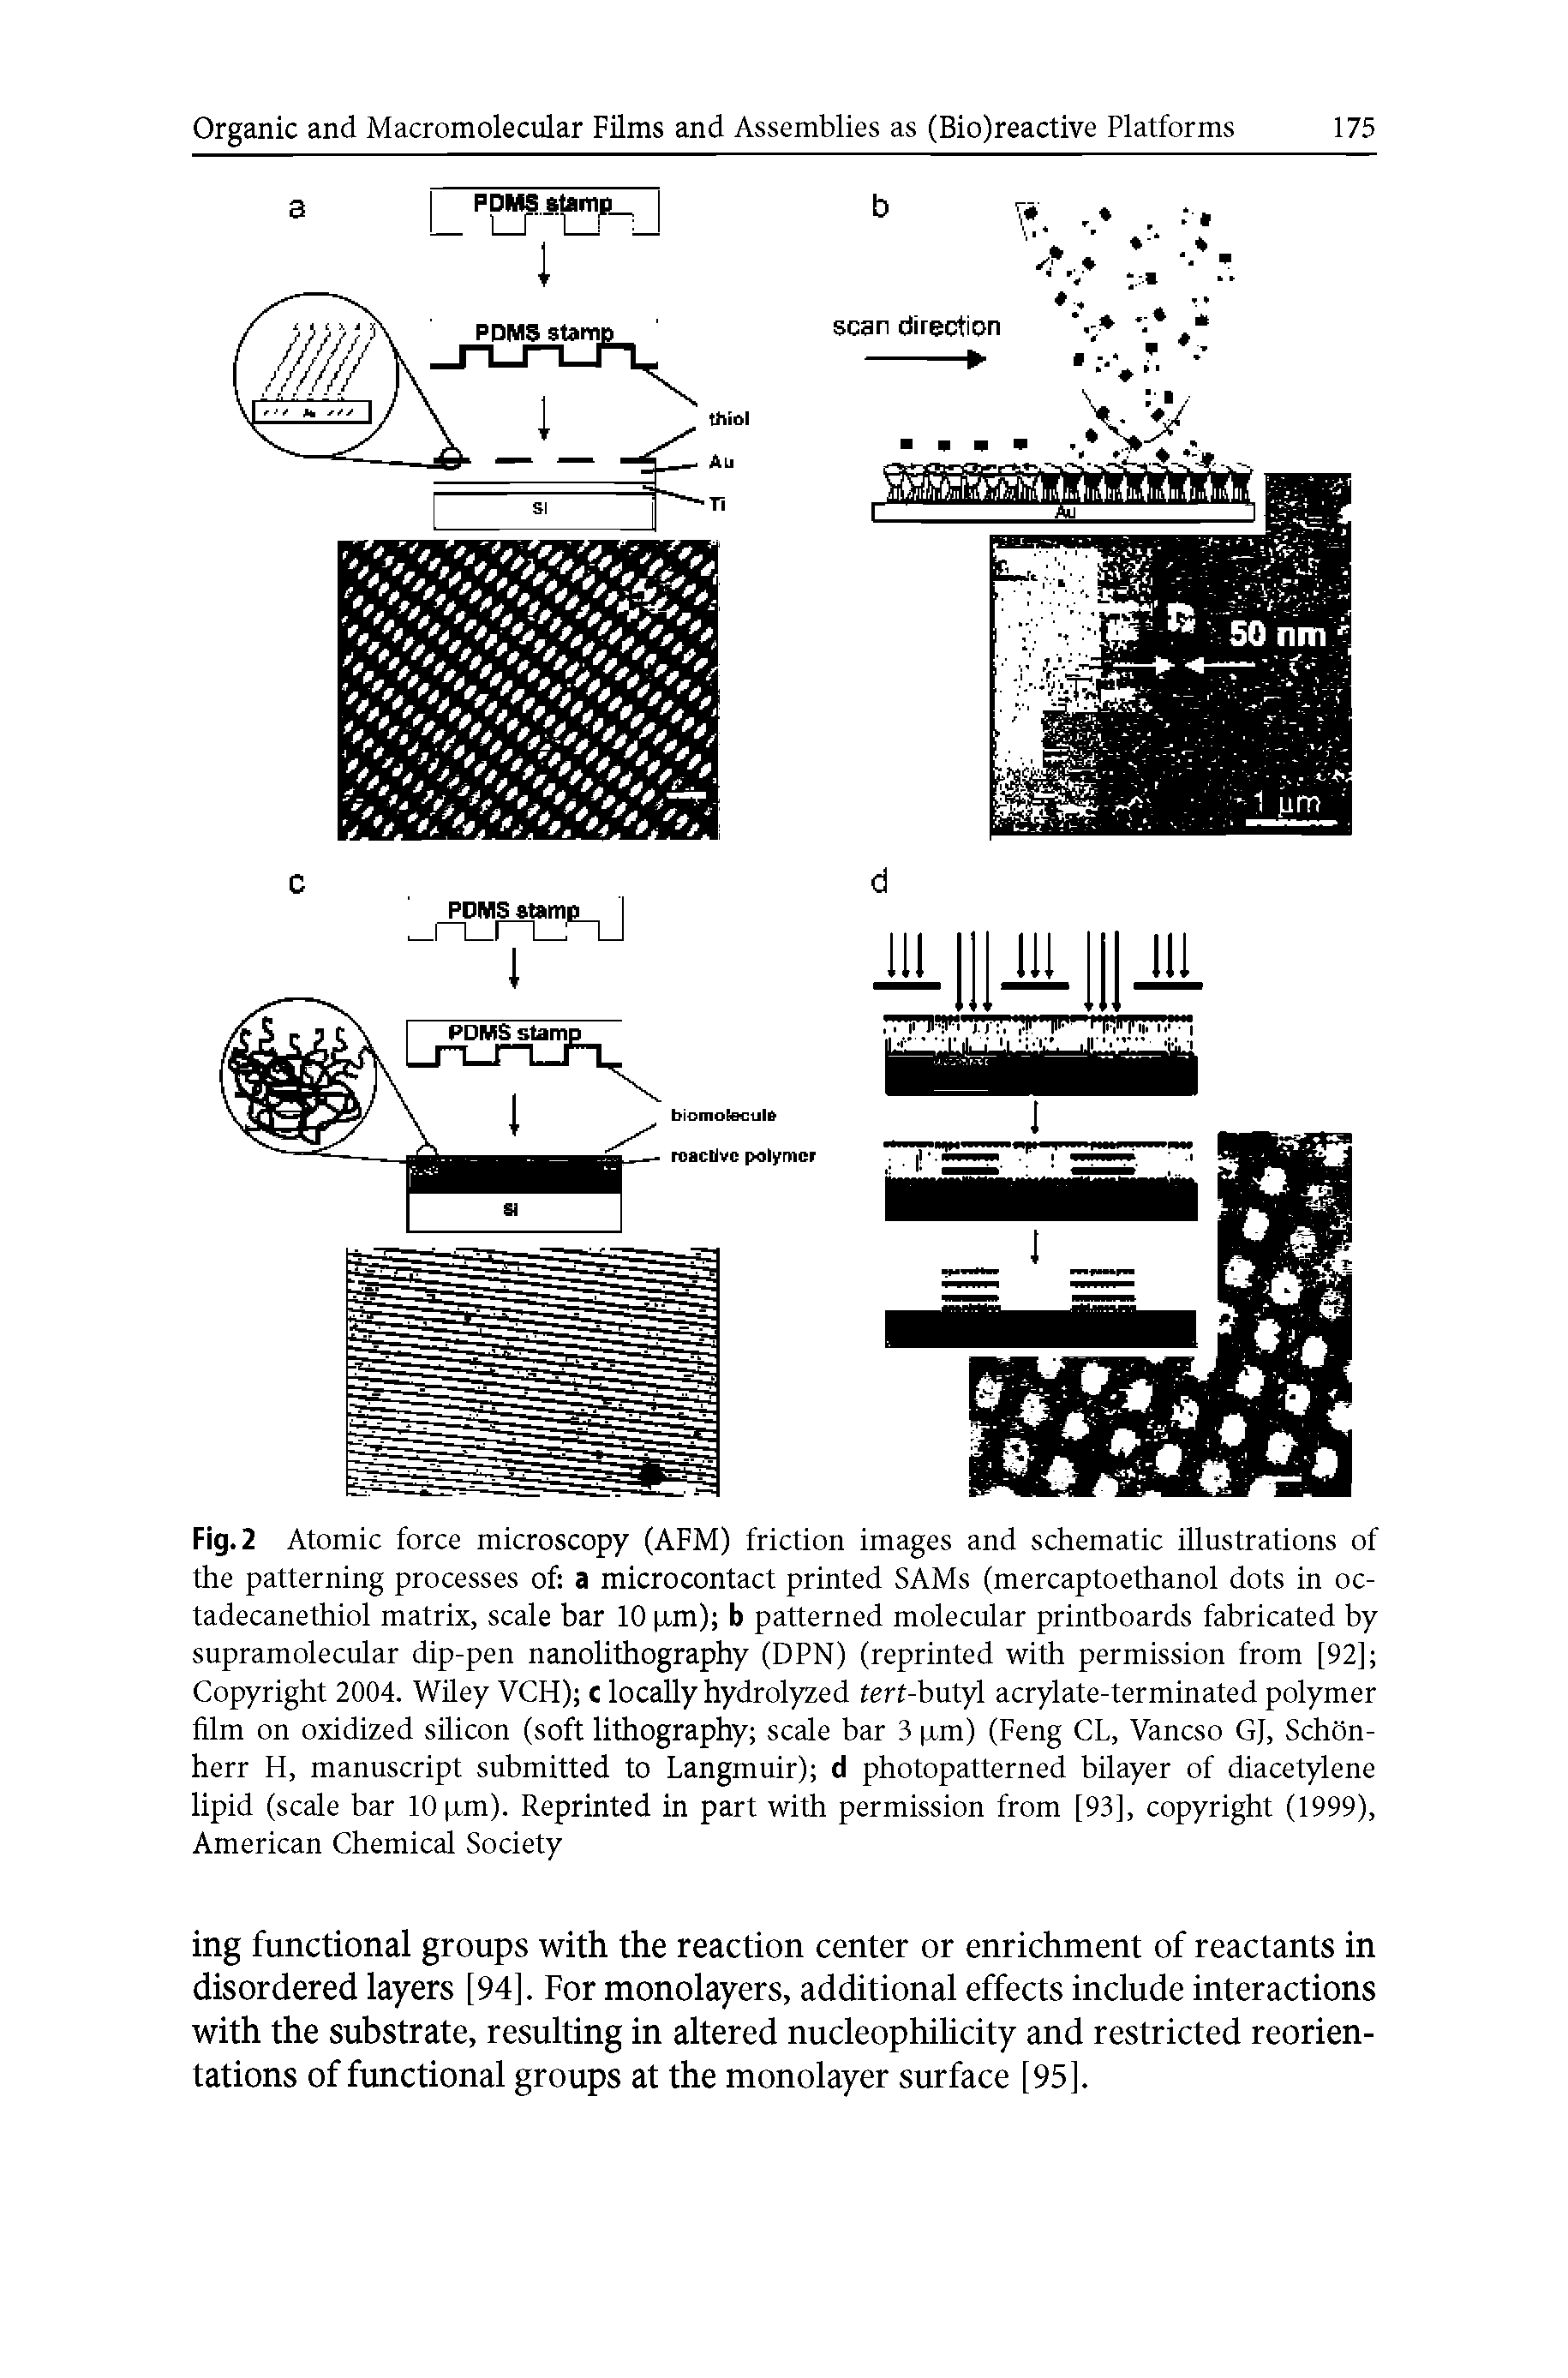 Fig. 2 Atomic force microscopy (AFM) friction images and schematic illustrations of the patterning processes of a microcontact printed SAMs (mercaptoethanol dots in oc-tadecanethiol matrix, scale bar 10 xm) b patterned molecular printboards fabricated by supramolecular dip-pen nanolithography (DPN) (reprinted with permission from [92] Copyright 2004. WUey VCH) e locally hydrolyzed tert-butyl acrylate-terminated polymer film on oxidized silicon (soft lithography scale bar 3 xm) (Feng CL, Vancso GJ, SchOn-herr H, manuscript submitted to Langmuir) d photopatterned bilayer of diacetylene lipid (scale bar 10 xm). Reprinted in part with permission from [93], copyright (1999), American Chemical Society...